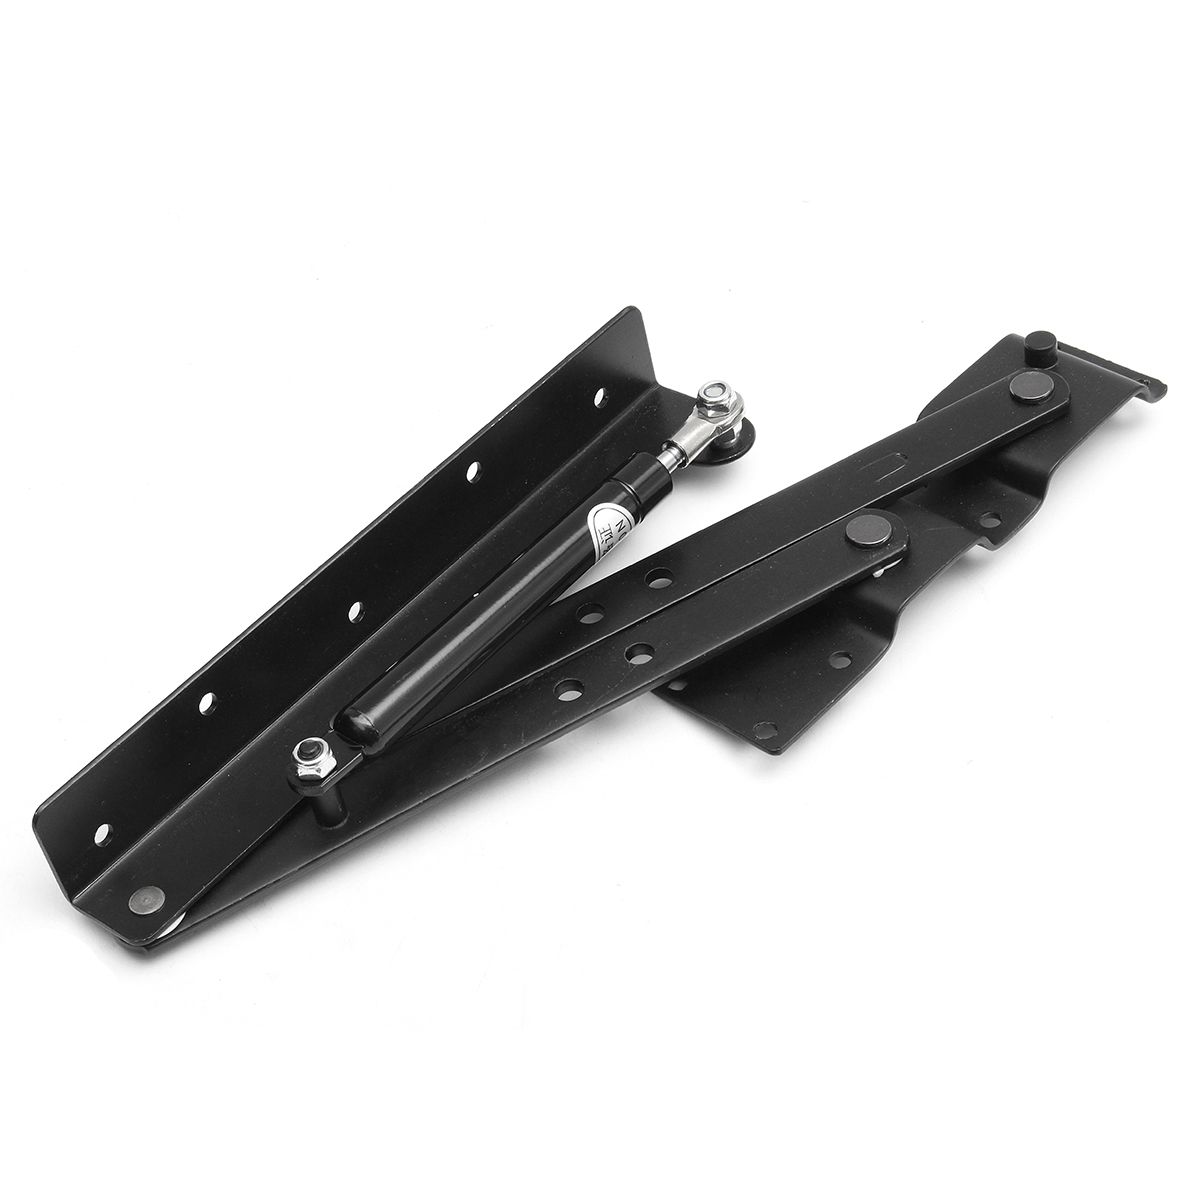 2PcsLot-Functional-Coffee-Table-Folding-Hinges-Lifting-Furniture-Hardware-Support-Frame-Spring-Hinge-1429027